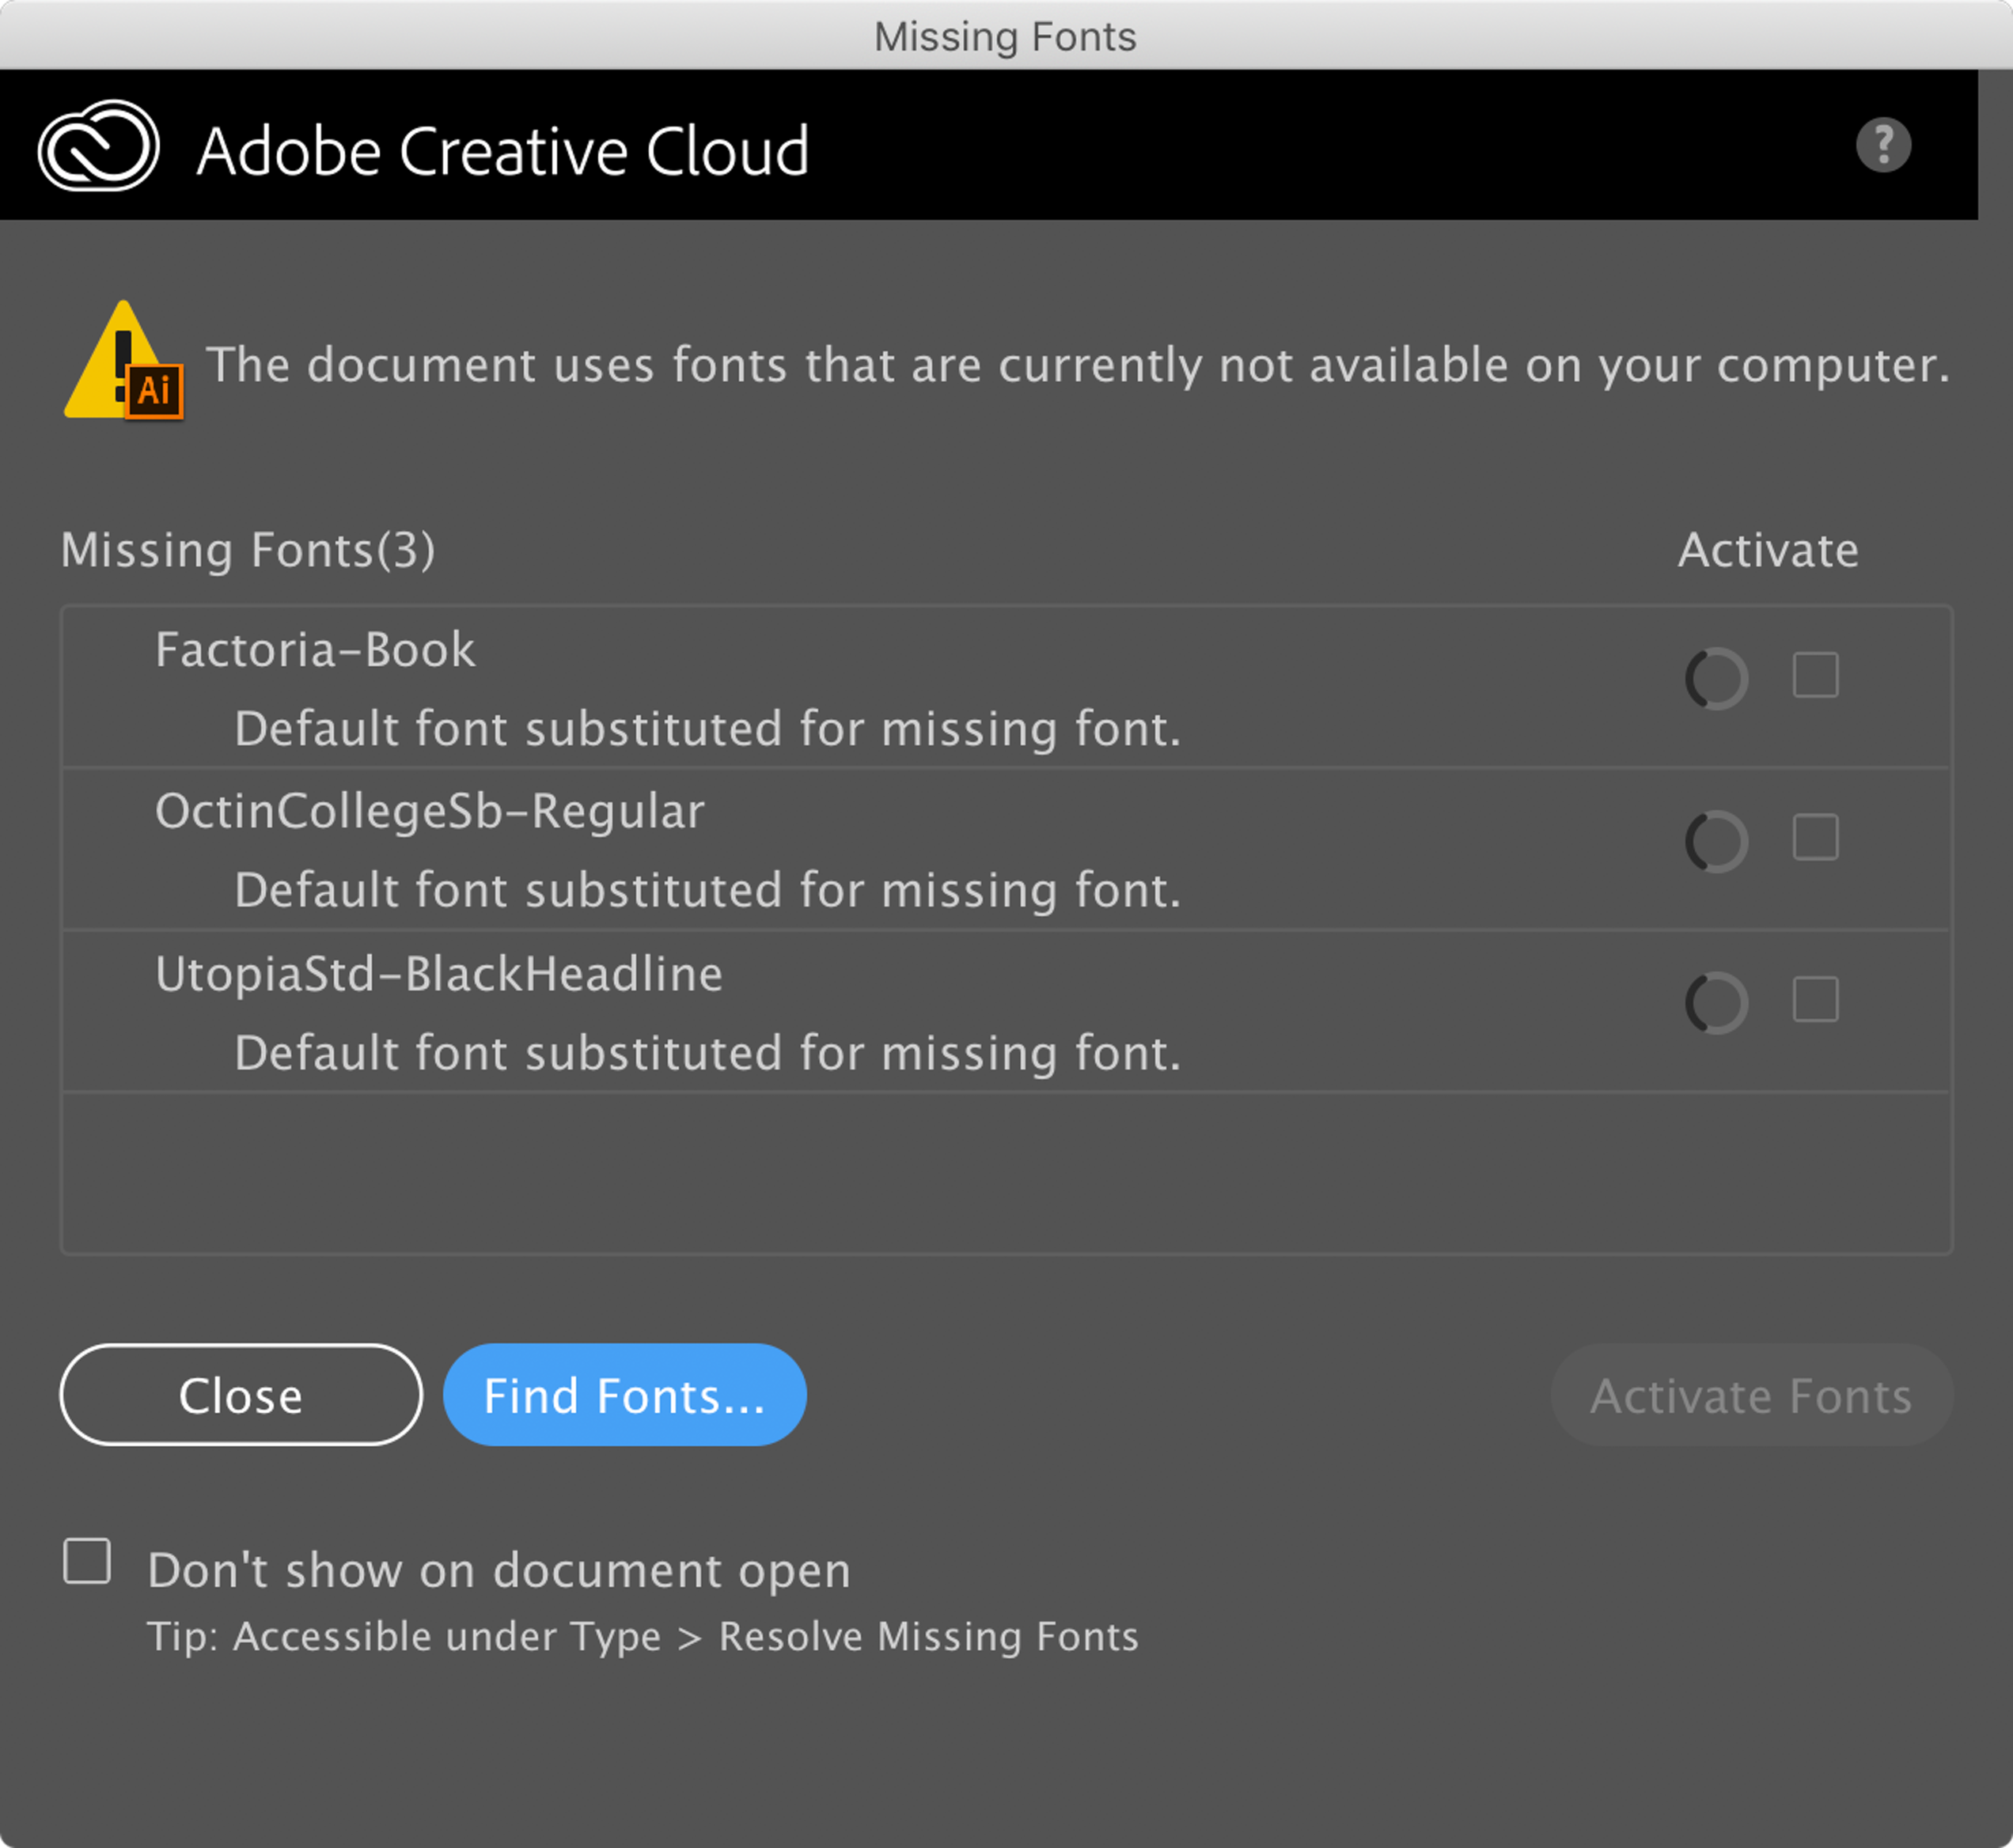 A software programme dialogue from Adobe Illustrator with the message "The document uses fonts that are currently not available on your computer", and lists 3 missing fonts